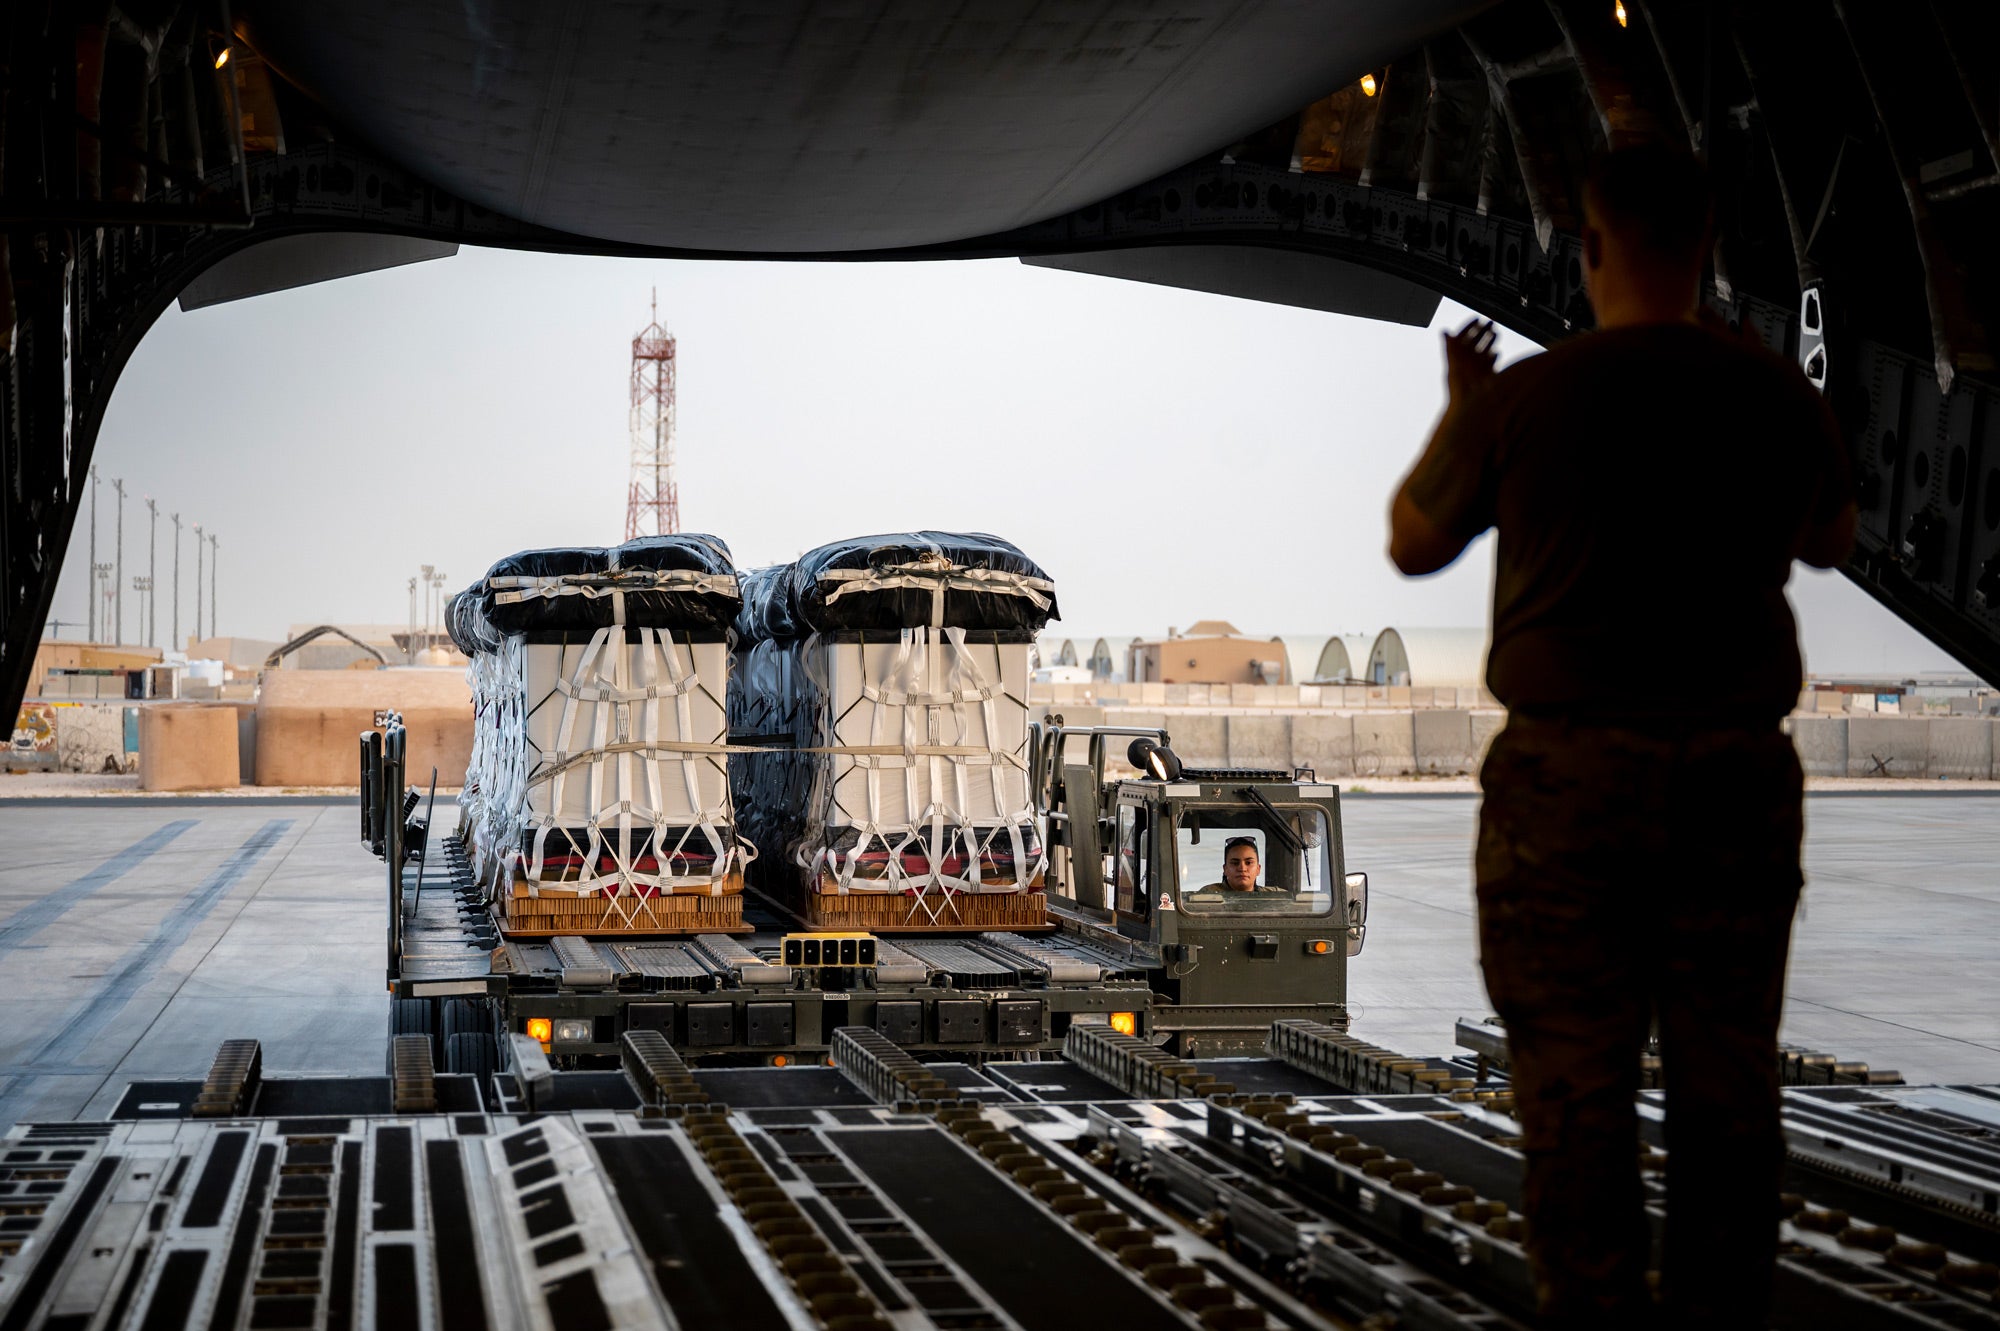 The LCADS low velocity parachutes are rigged on top of the payloads along with the low cost container net. They are ready to be rolled onto the plane for airdrop. Somewhere in Qatar.